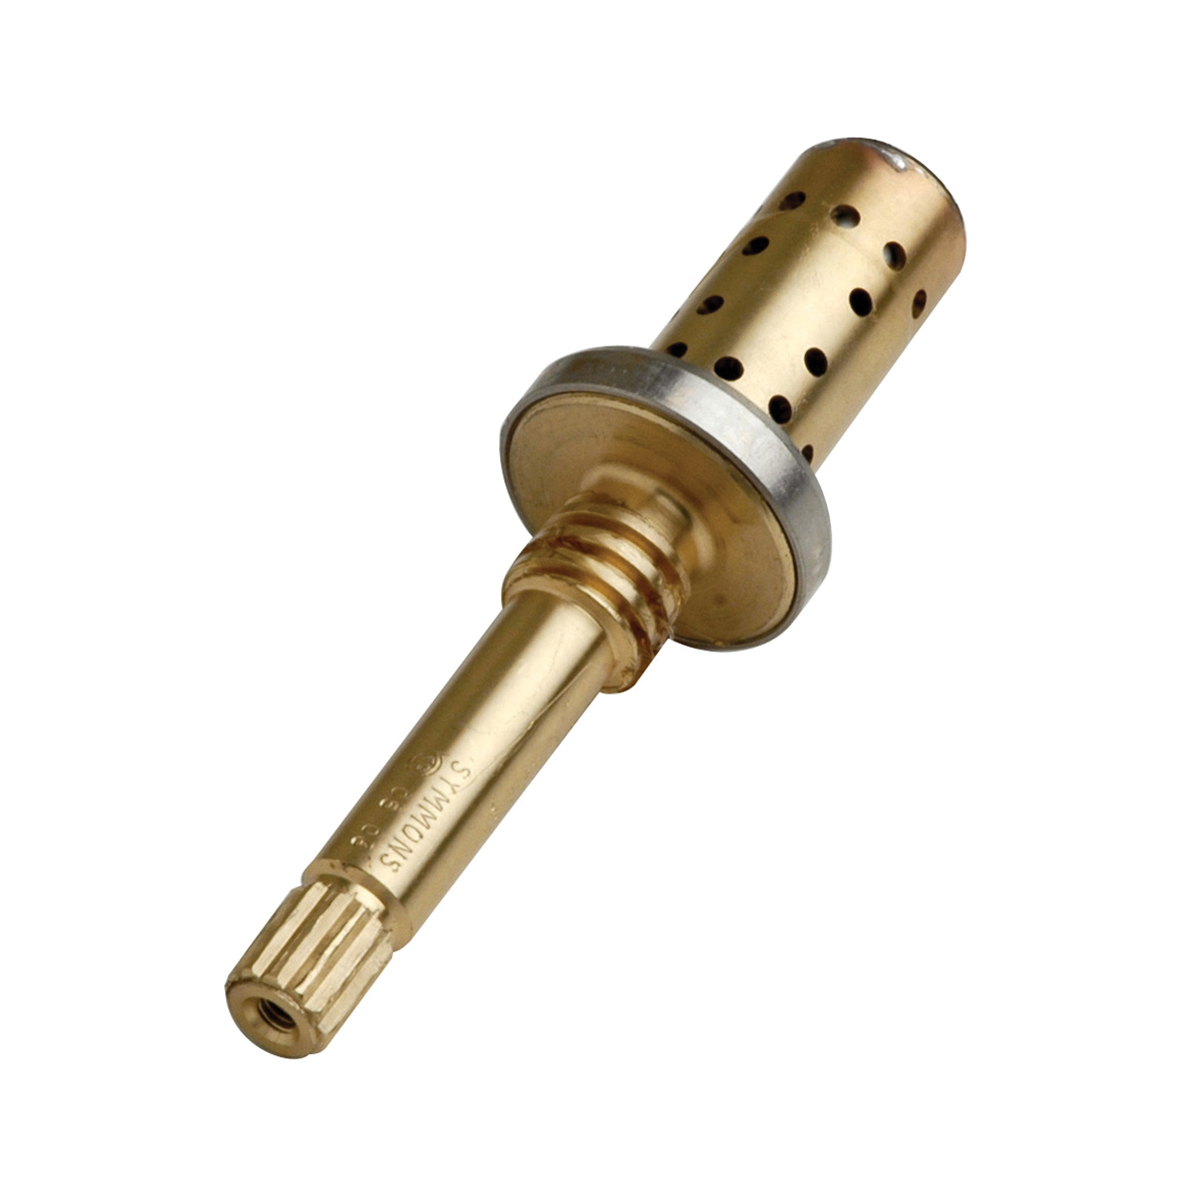 Symmons® TA-10 Pressure Balance Flow Control Spindle, Temptrol®, For Use With Temptrol Shower Units, Brass, Polished Chrome